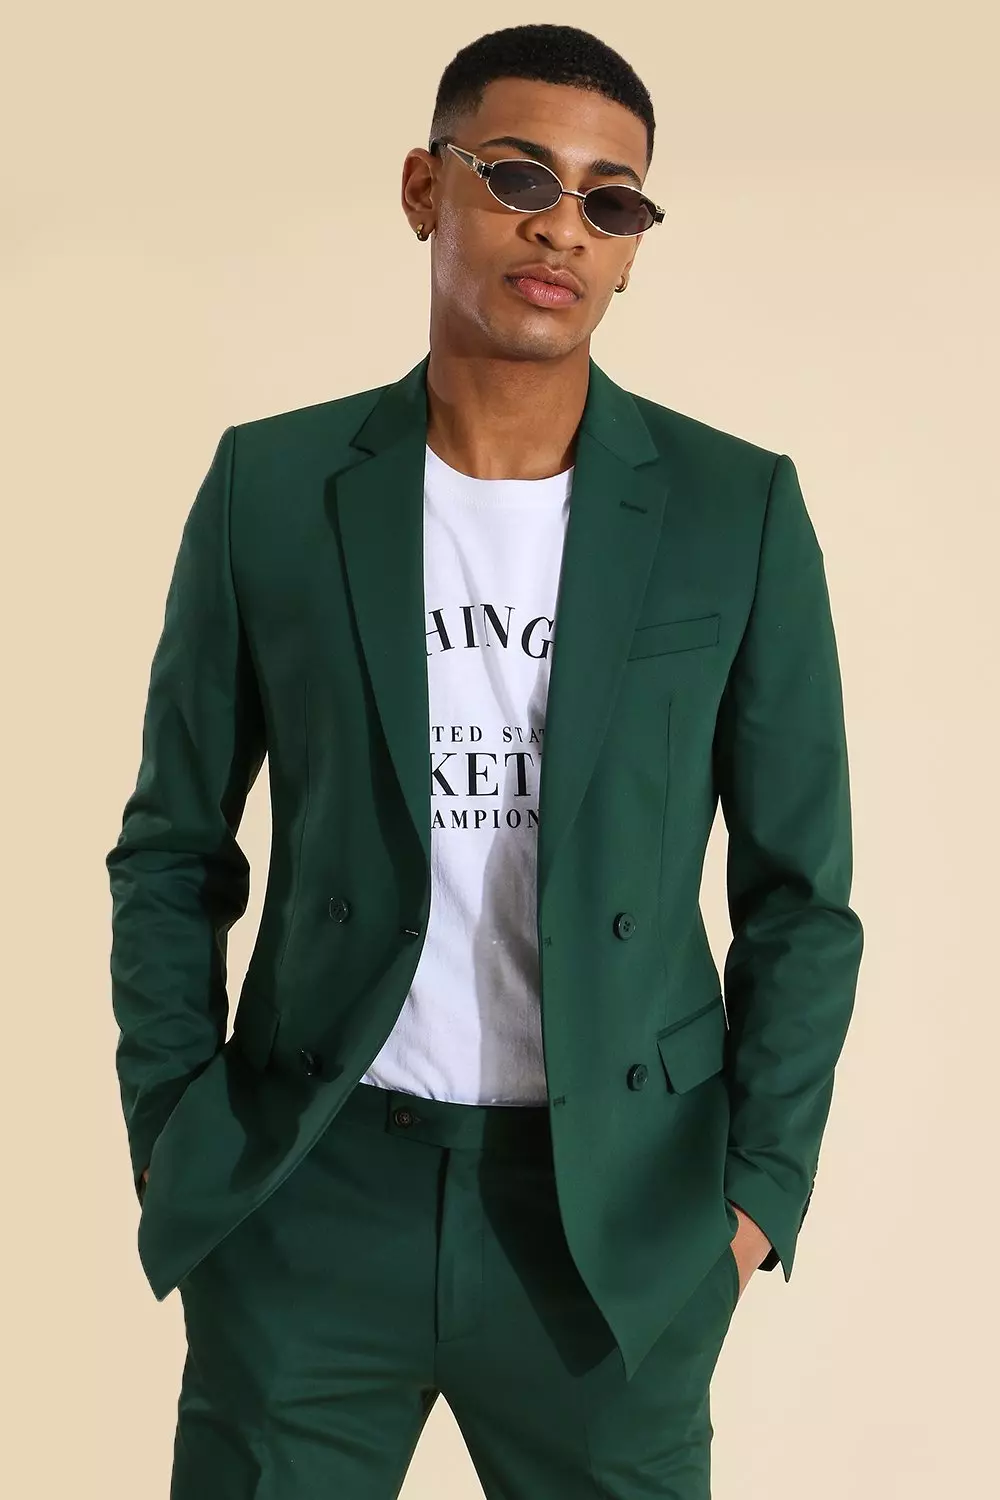 Single Breasted Tapestry Suit Jacket | boohooMAN USA